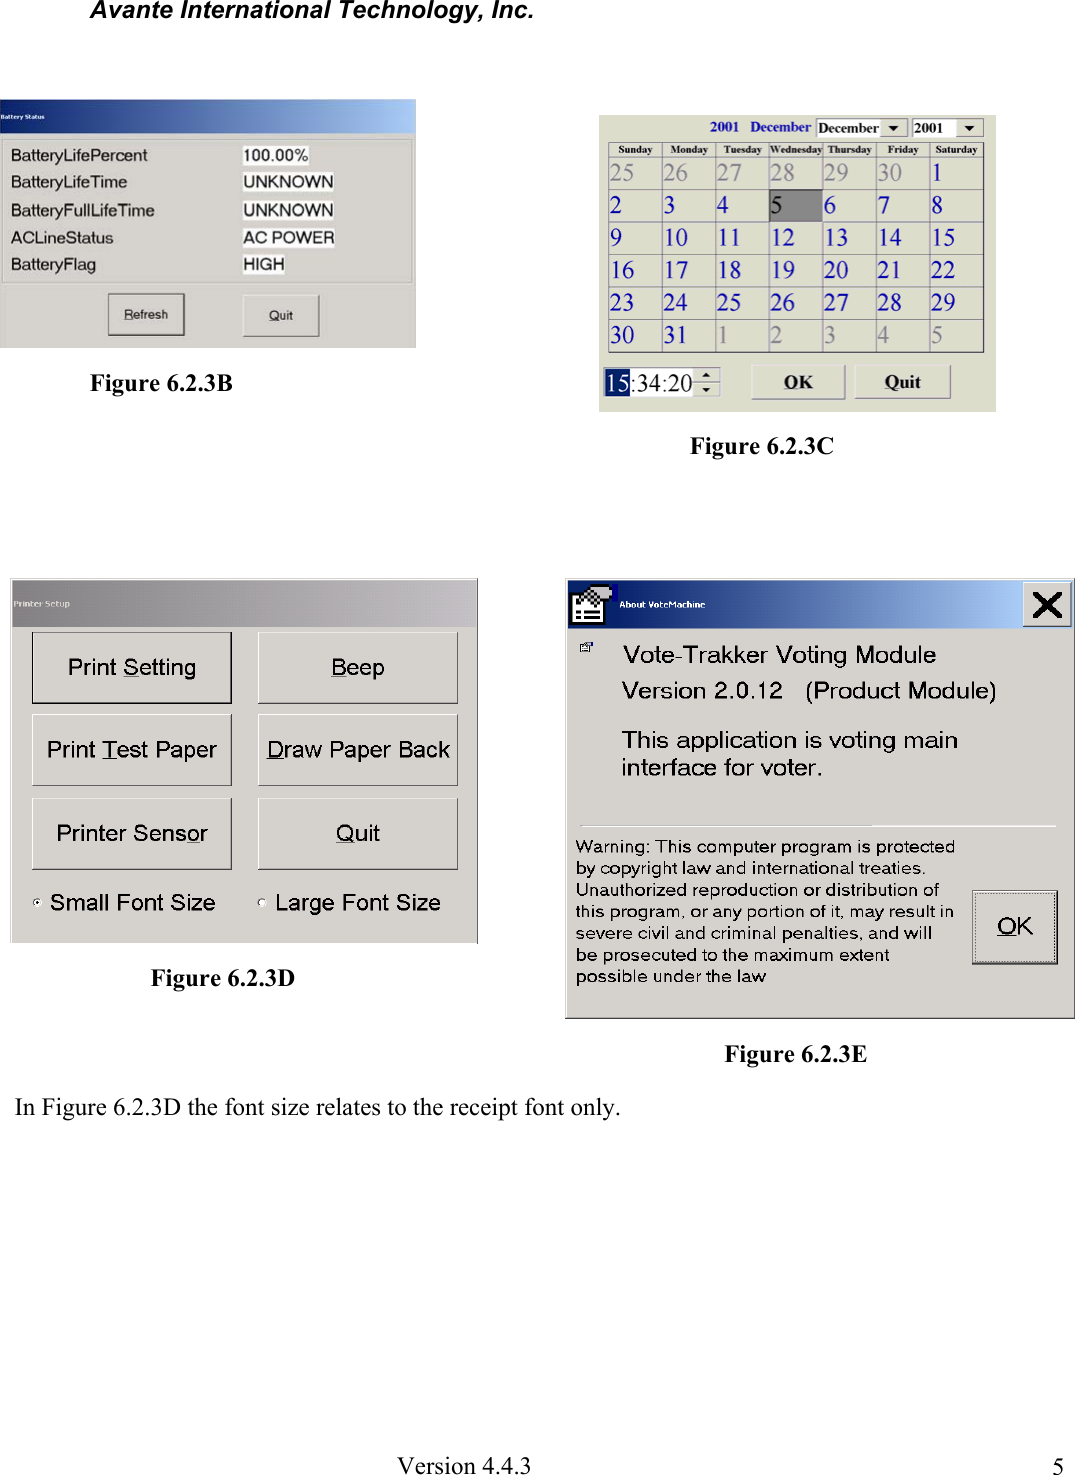 Avante International Technology, Inc.  Version 4.4.3  5                          In Figure 6.2.3D the font size relates to the receipt font only. Figure 6.2.3B         Figure 6.2.3D            Figure 6.2.3E Figure 6.2.3C 